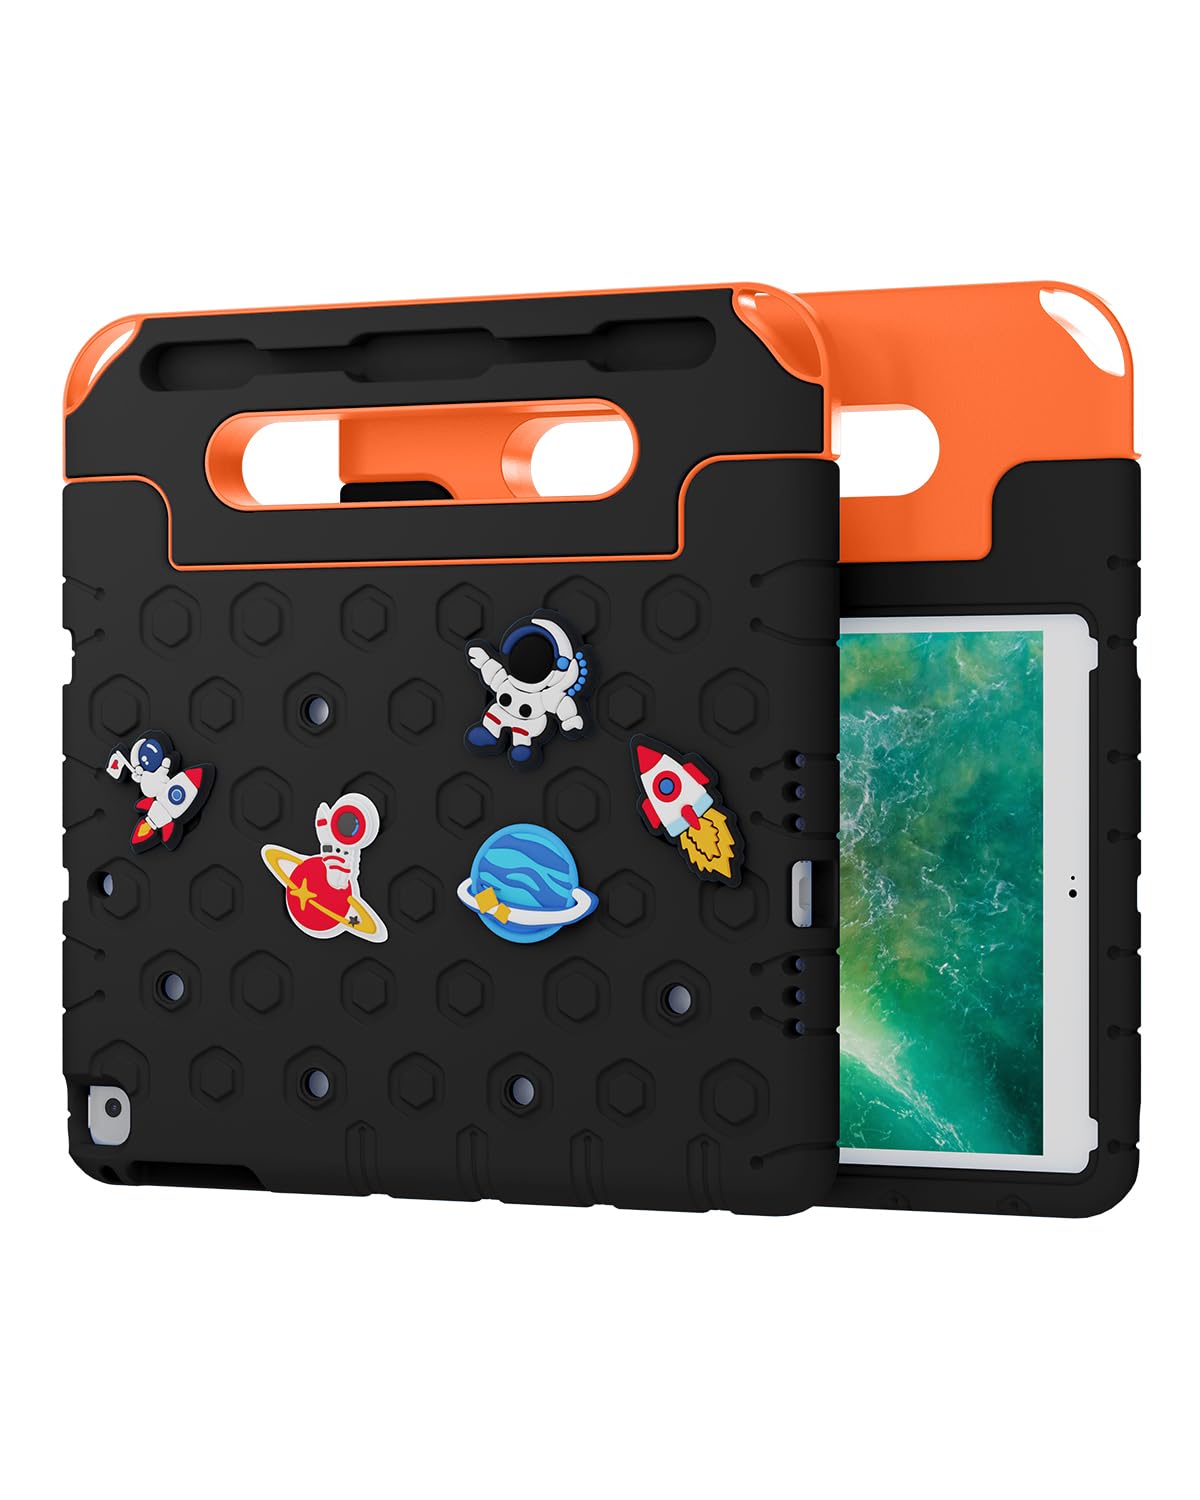 Moxedo Rugged Protective EVA Silicone Kids Case Cover, Shockproof DIY 3D Cartoon Pattern with Pencil Holder, Stand and Handle Grip for Apple iPad 9.7 inch